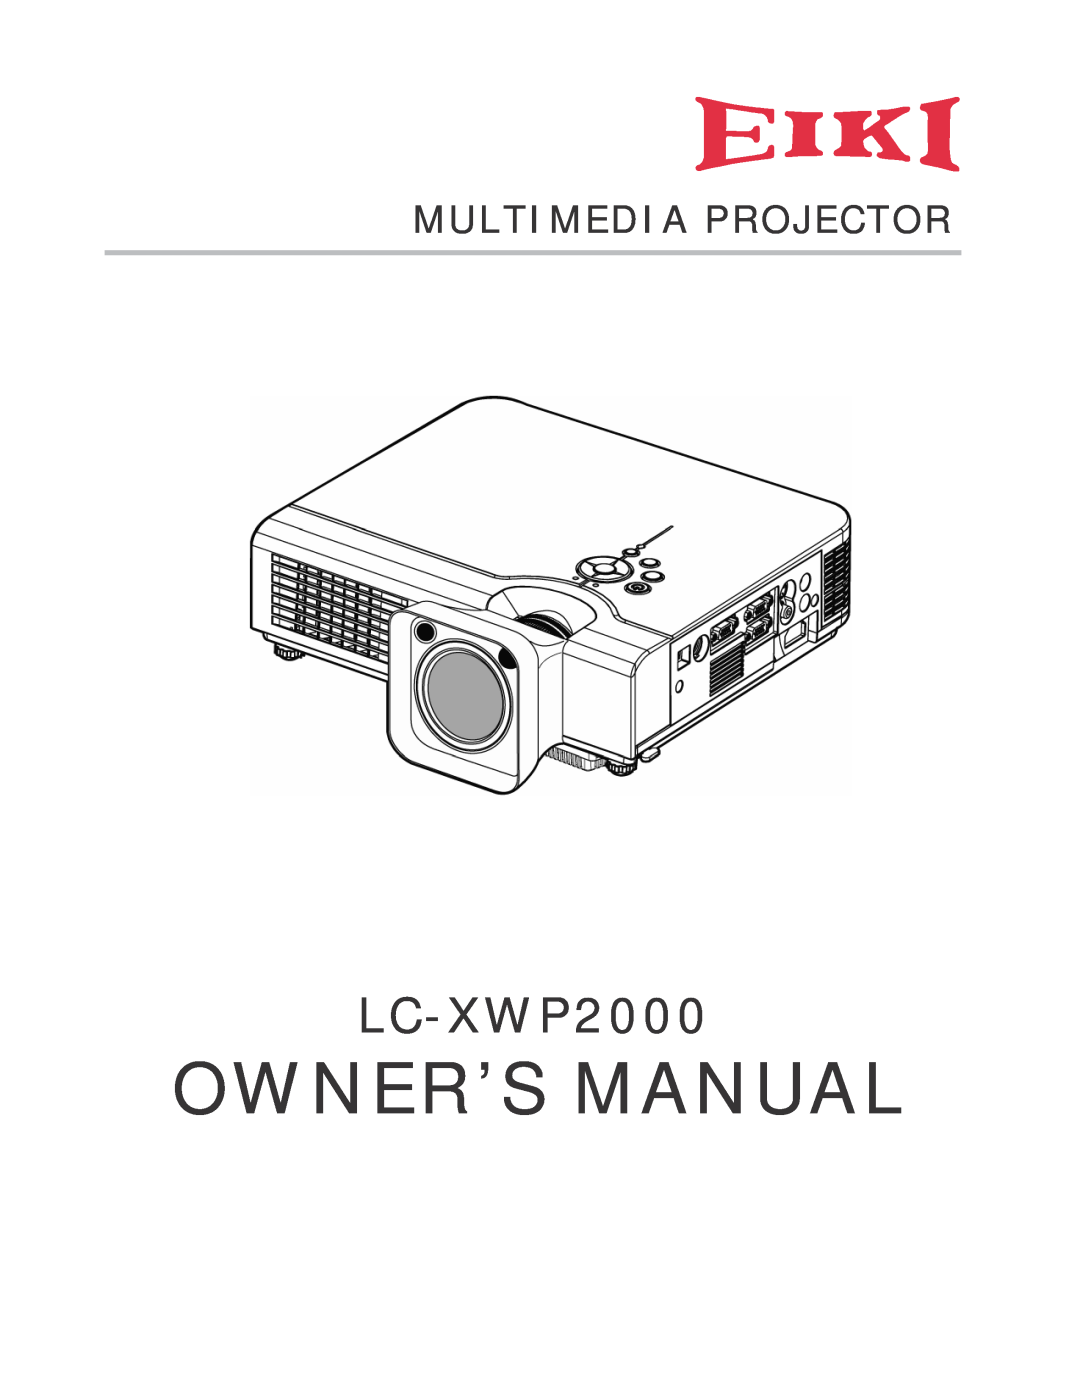 Eiki LC-XWP2000 manual Owner’S Manual, Multimedia Projector 